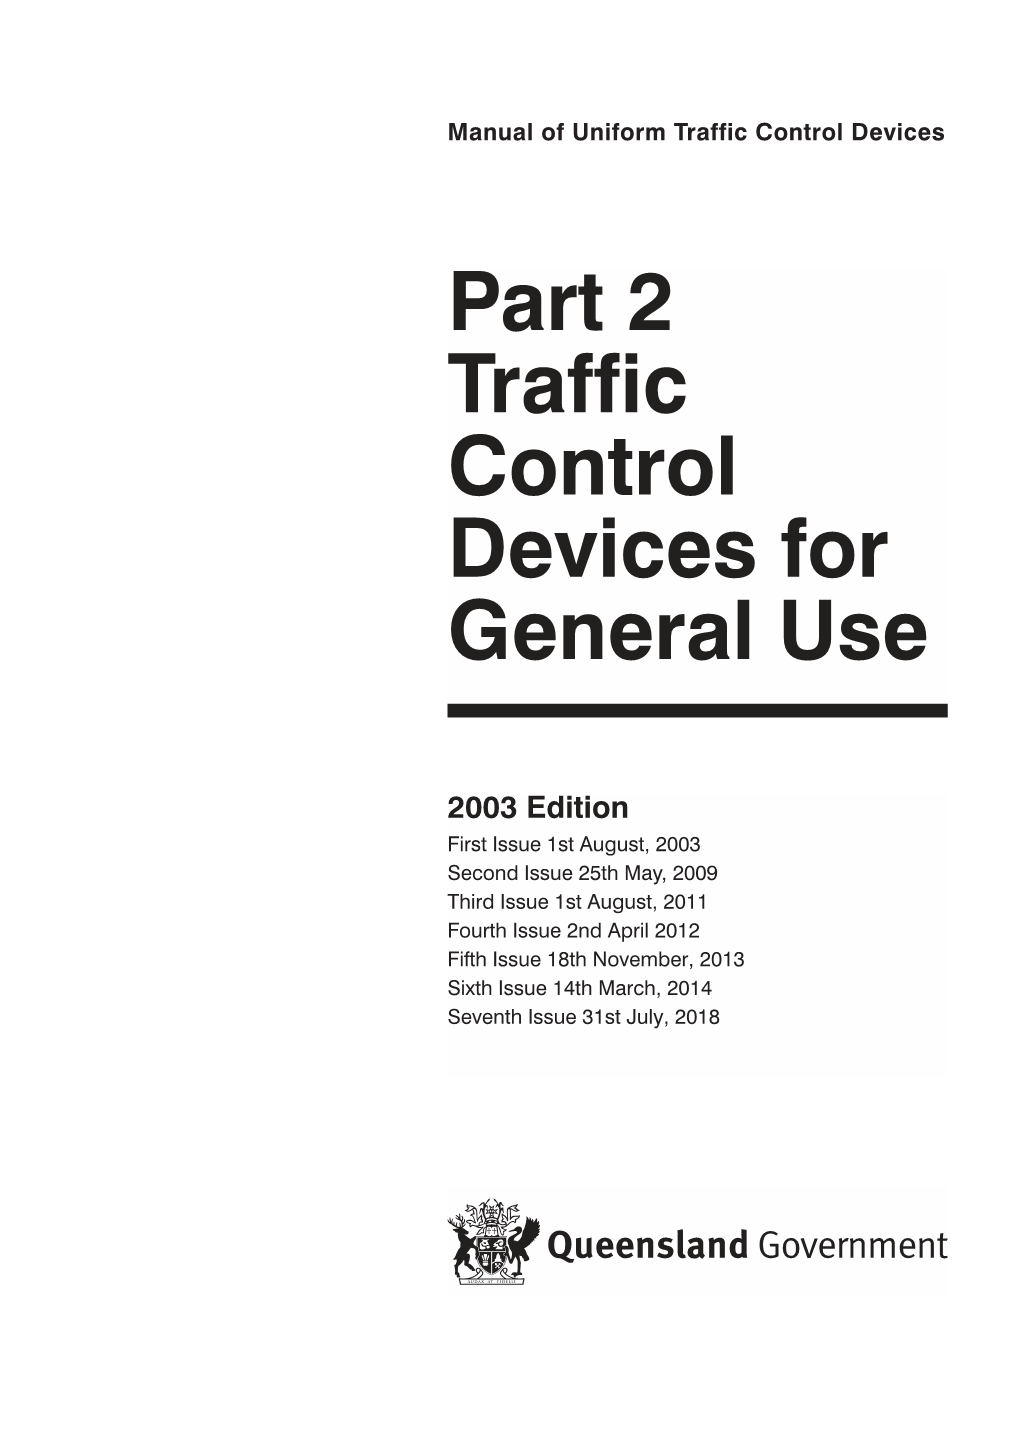 Part 2: Traffic Control Devices for General